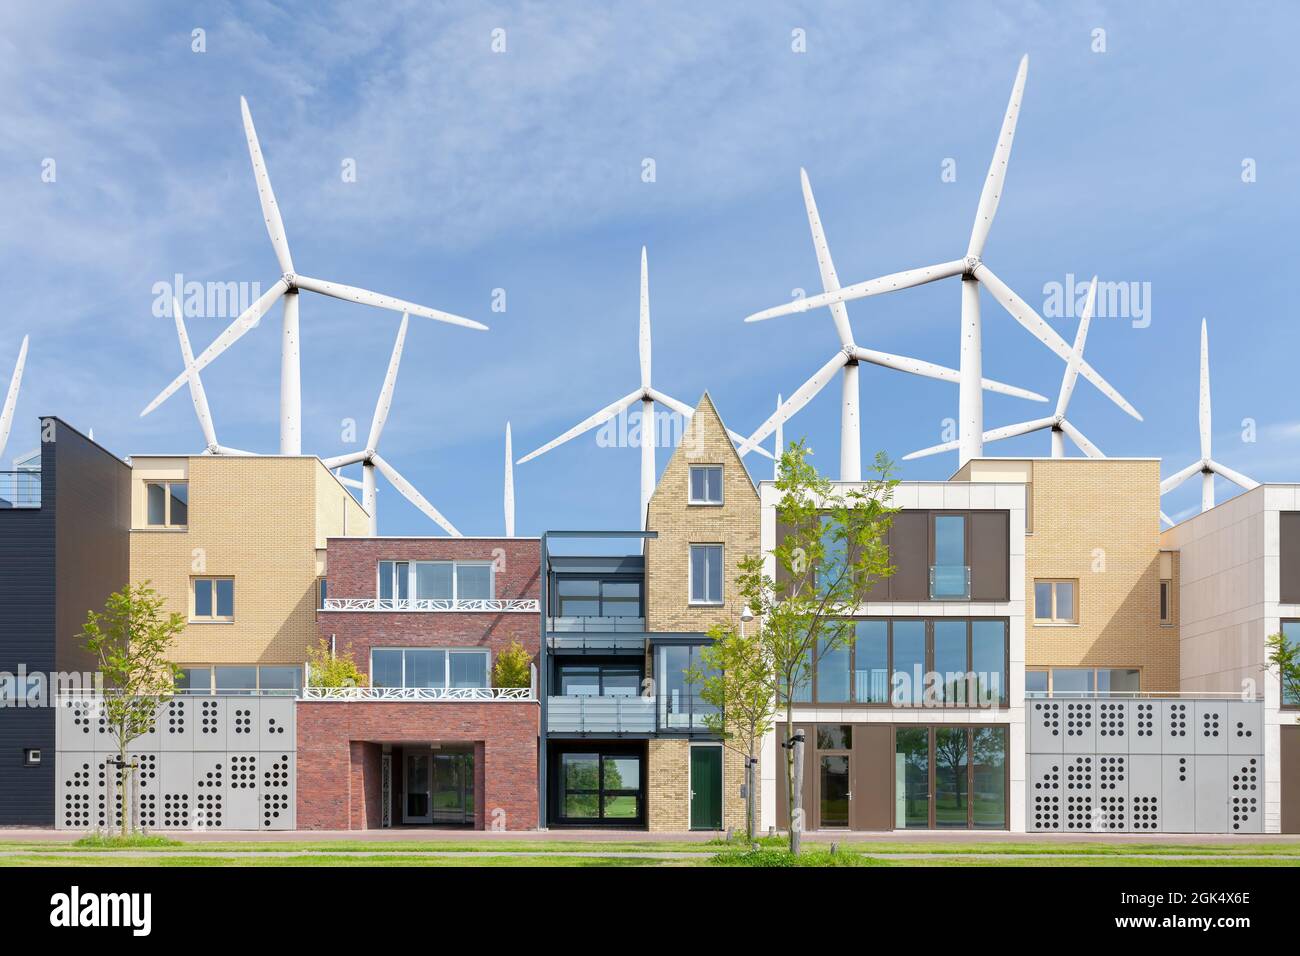 Row of new modern Dutch family houses in front of a field with large windturbines Stock Photo